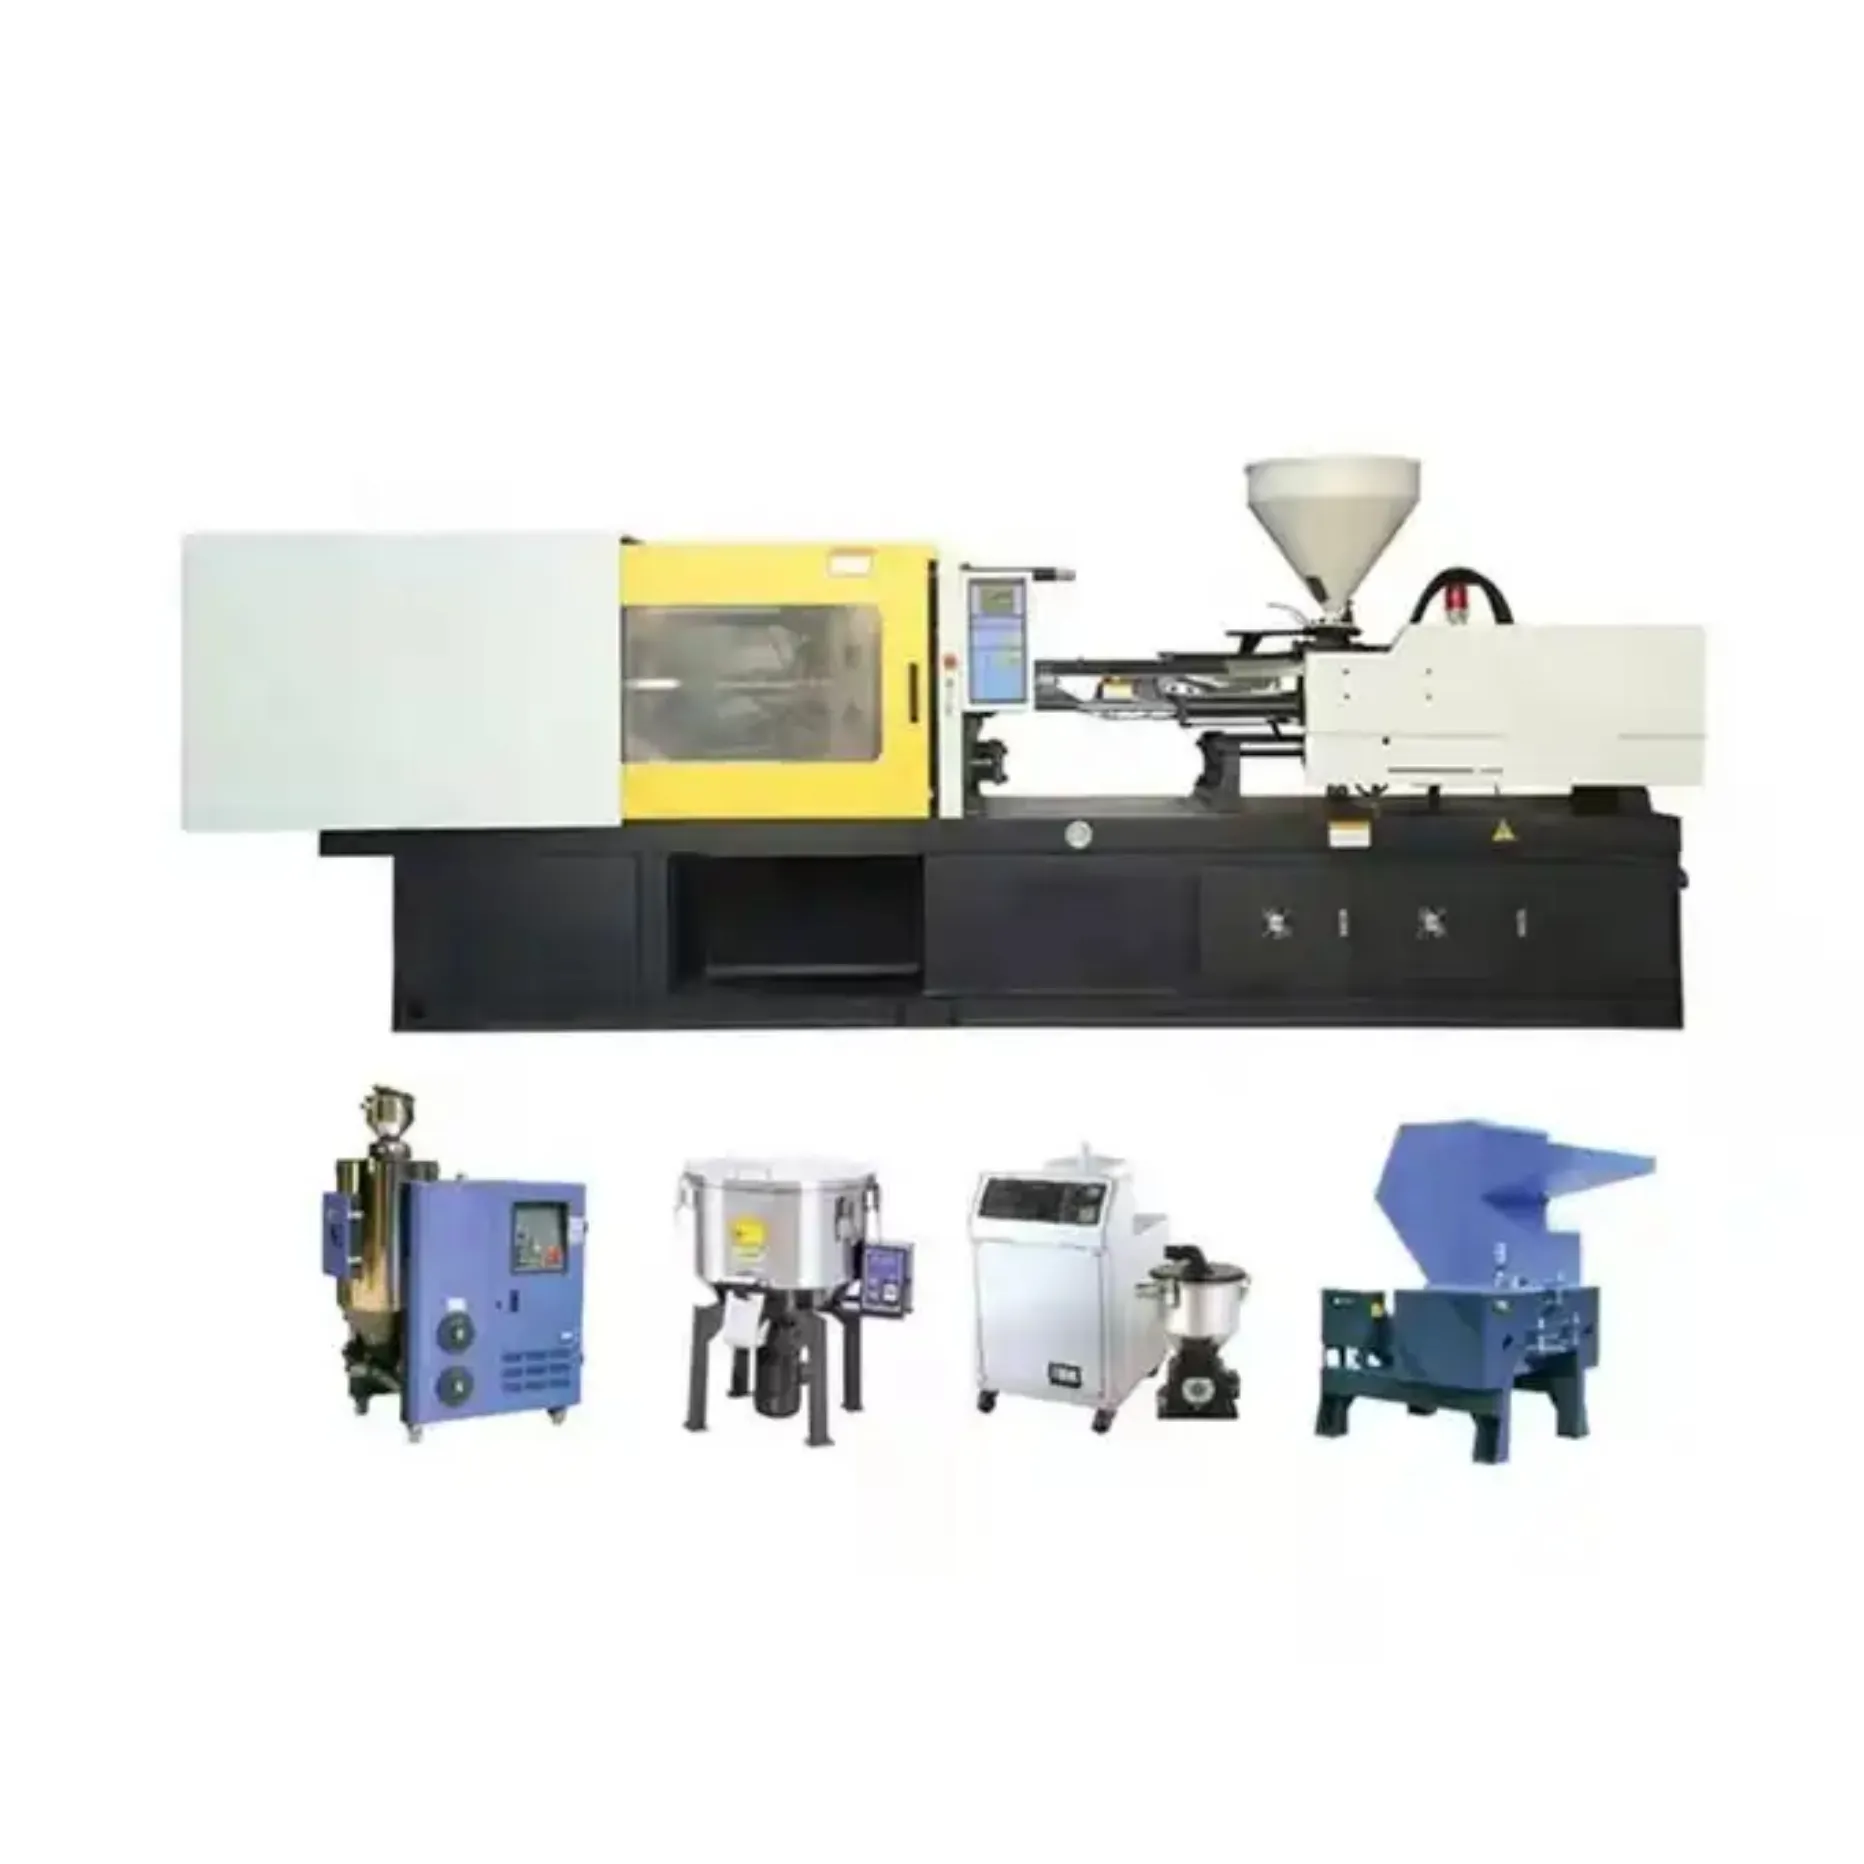 Automatic Electric Horizontal Low Cost Plastic Injection Molding Machine